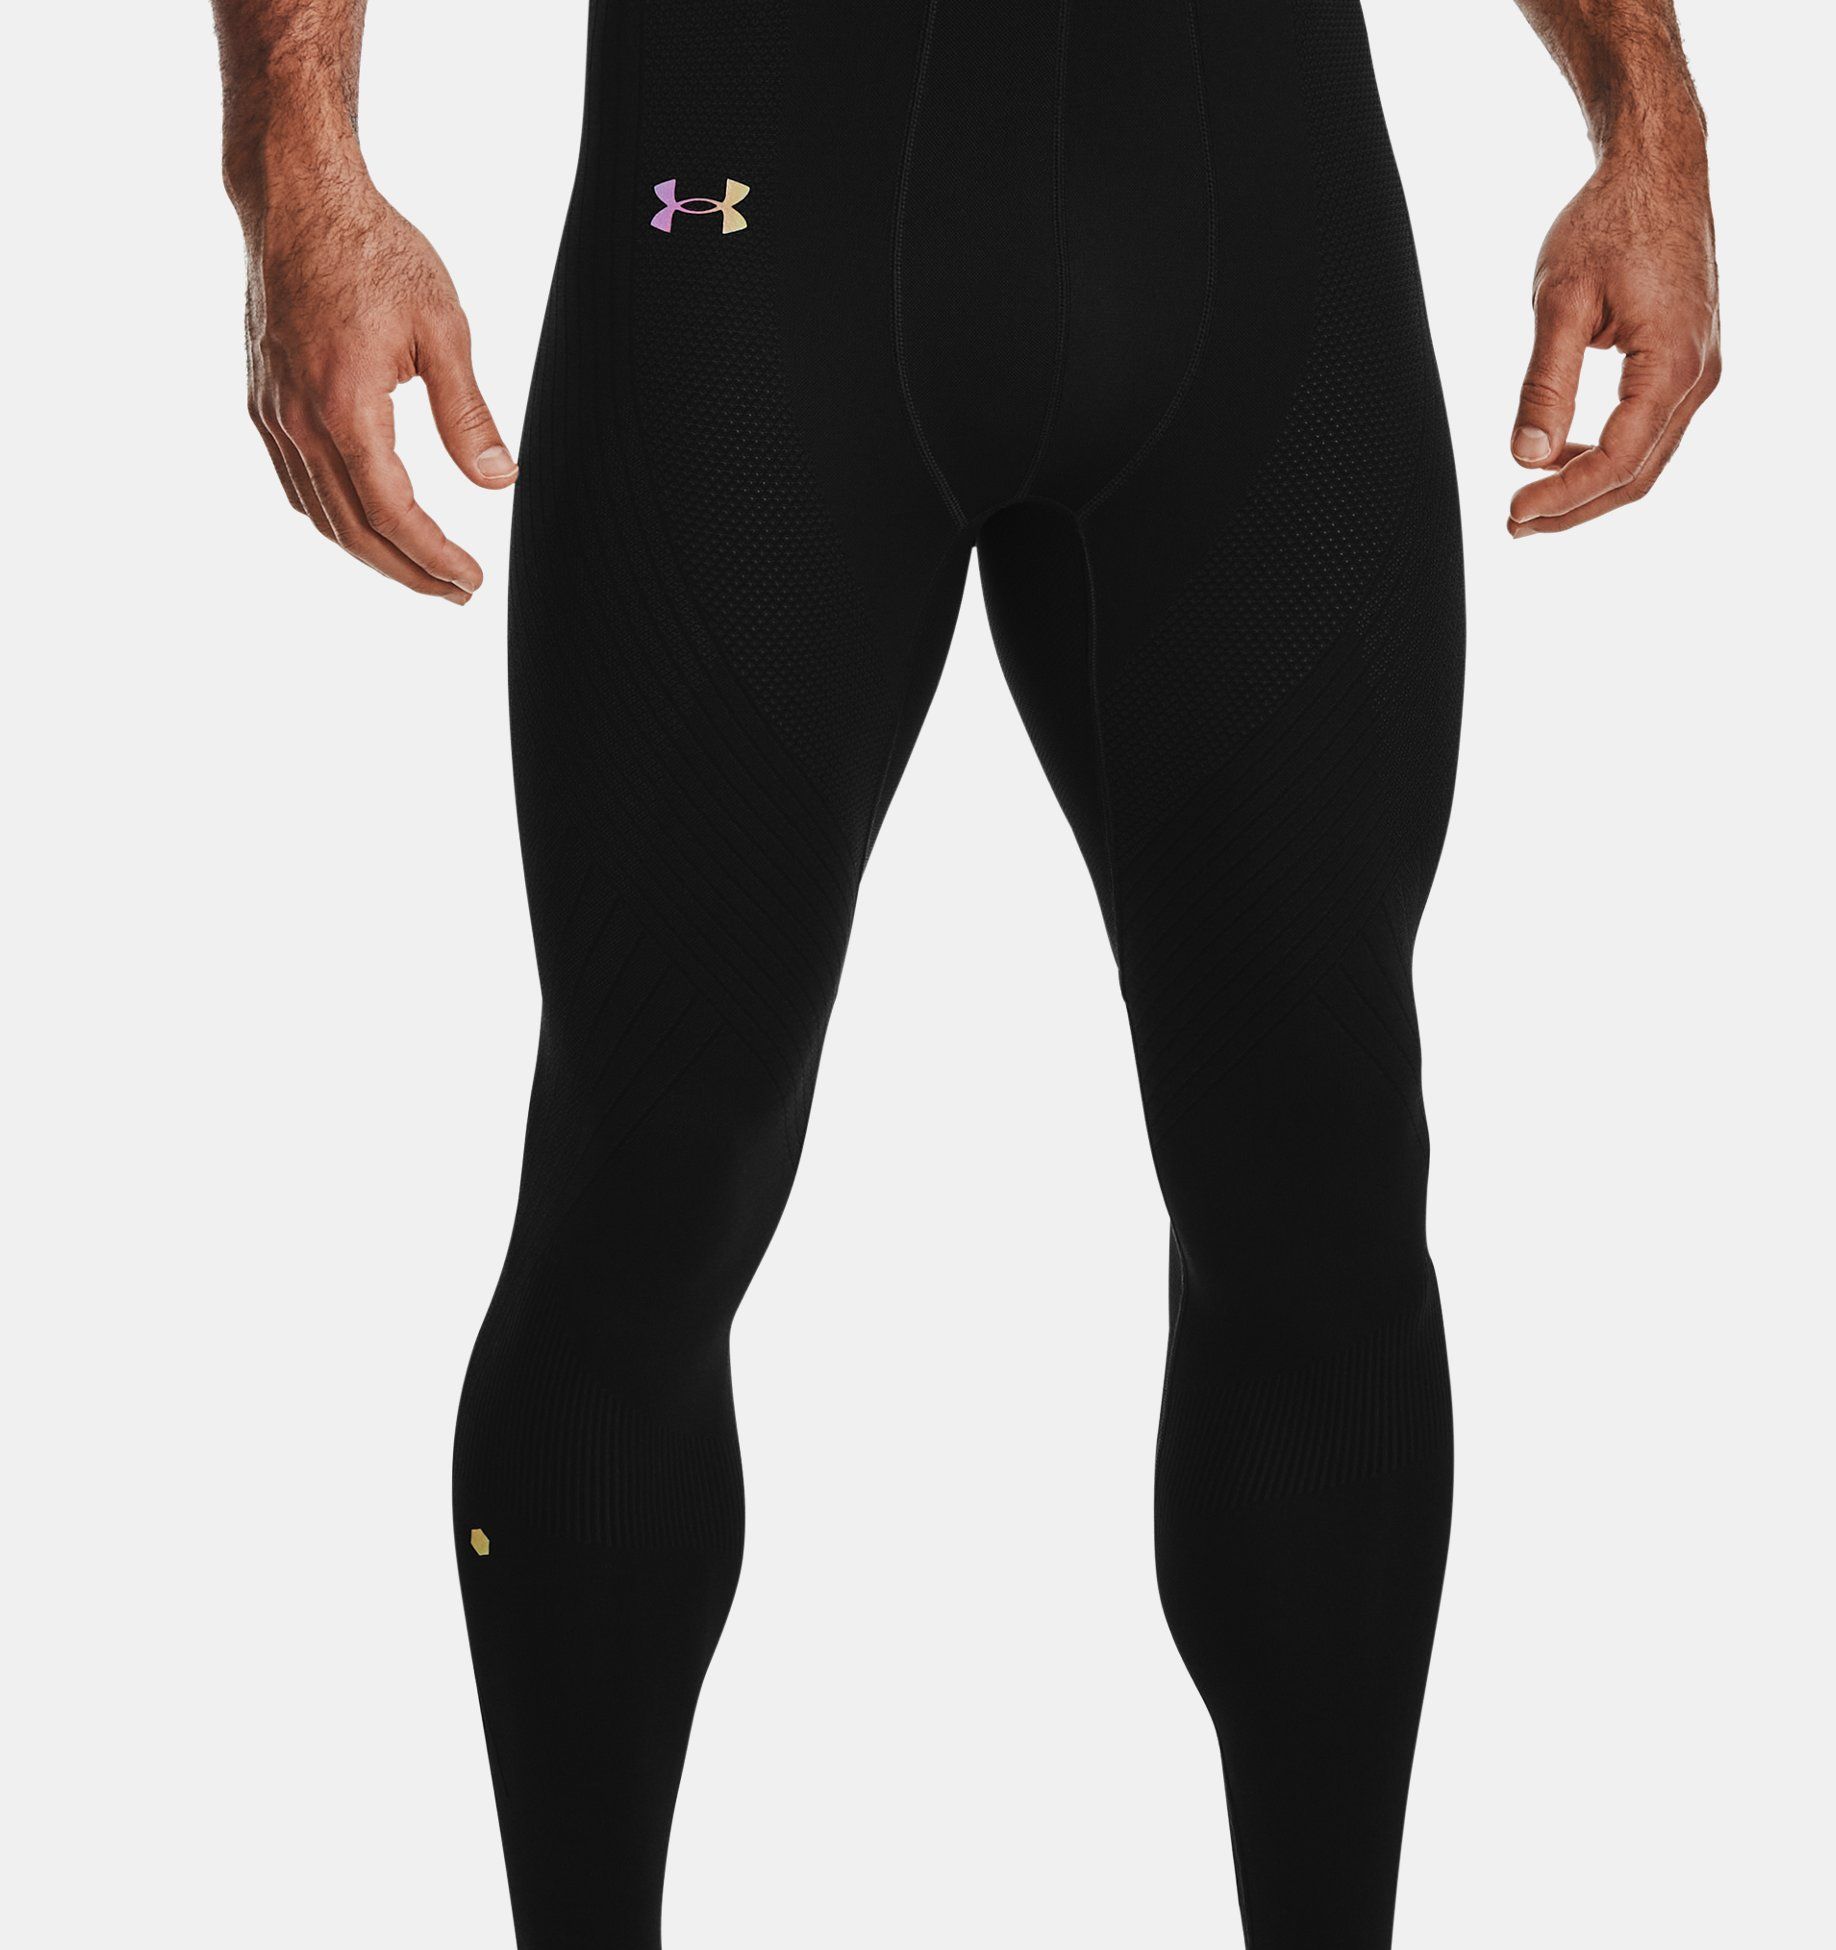 Runhit 3/4 Compression Pants Men with Pockets,Workout Athletic Tights Leggings 